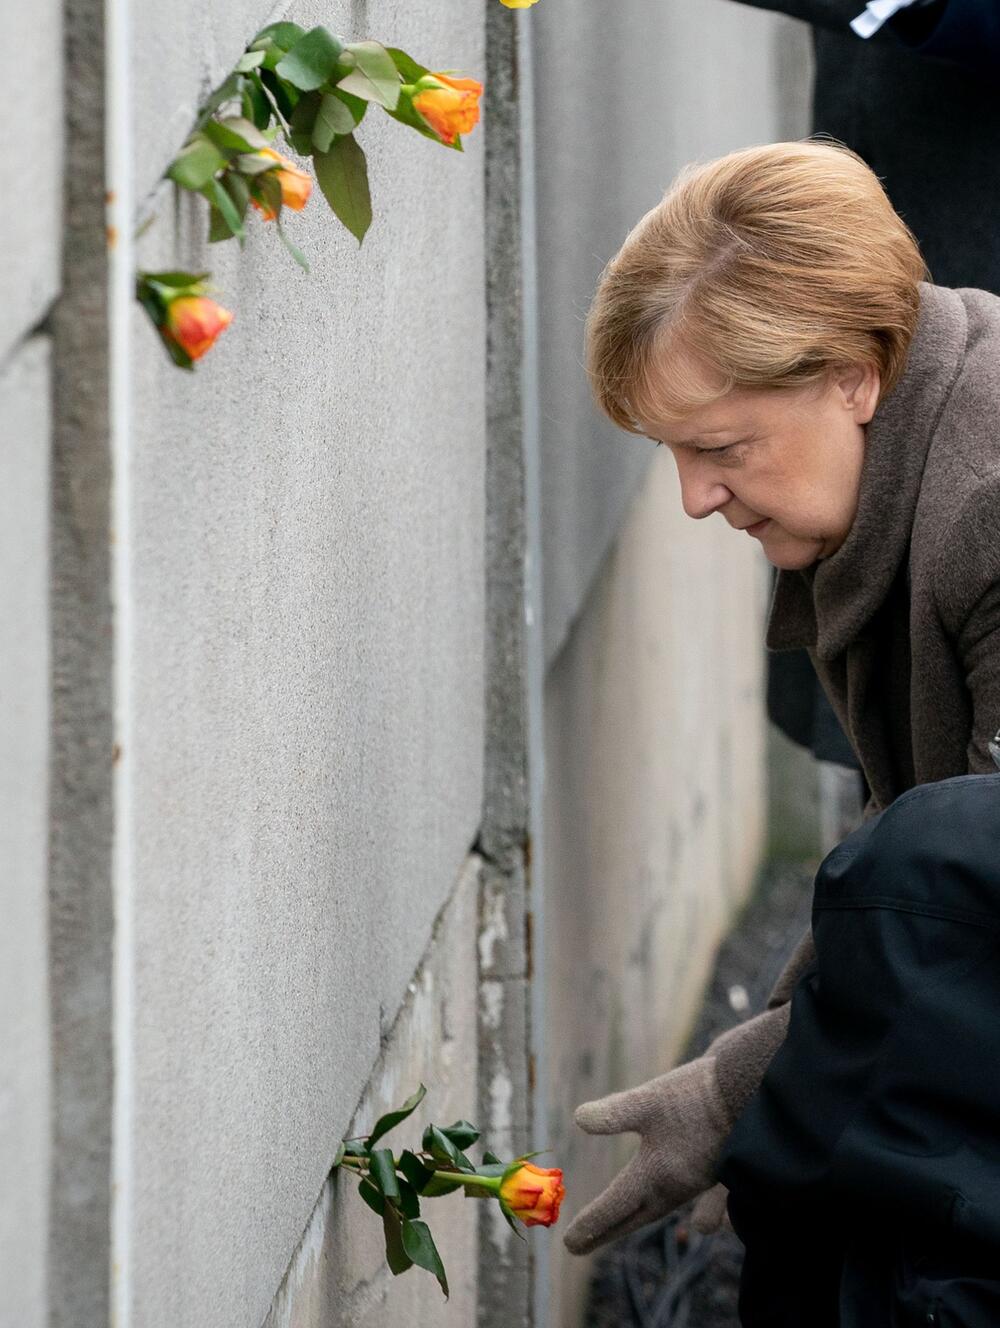 30th anniversary of the fall of the Berlin Wall